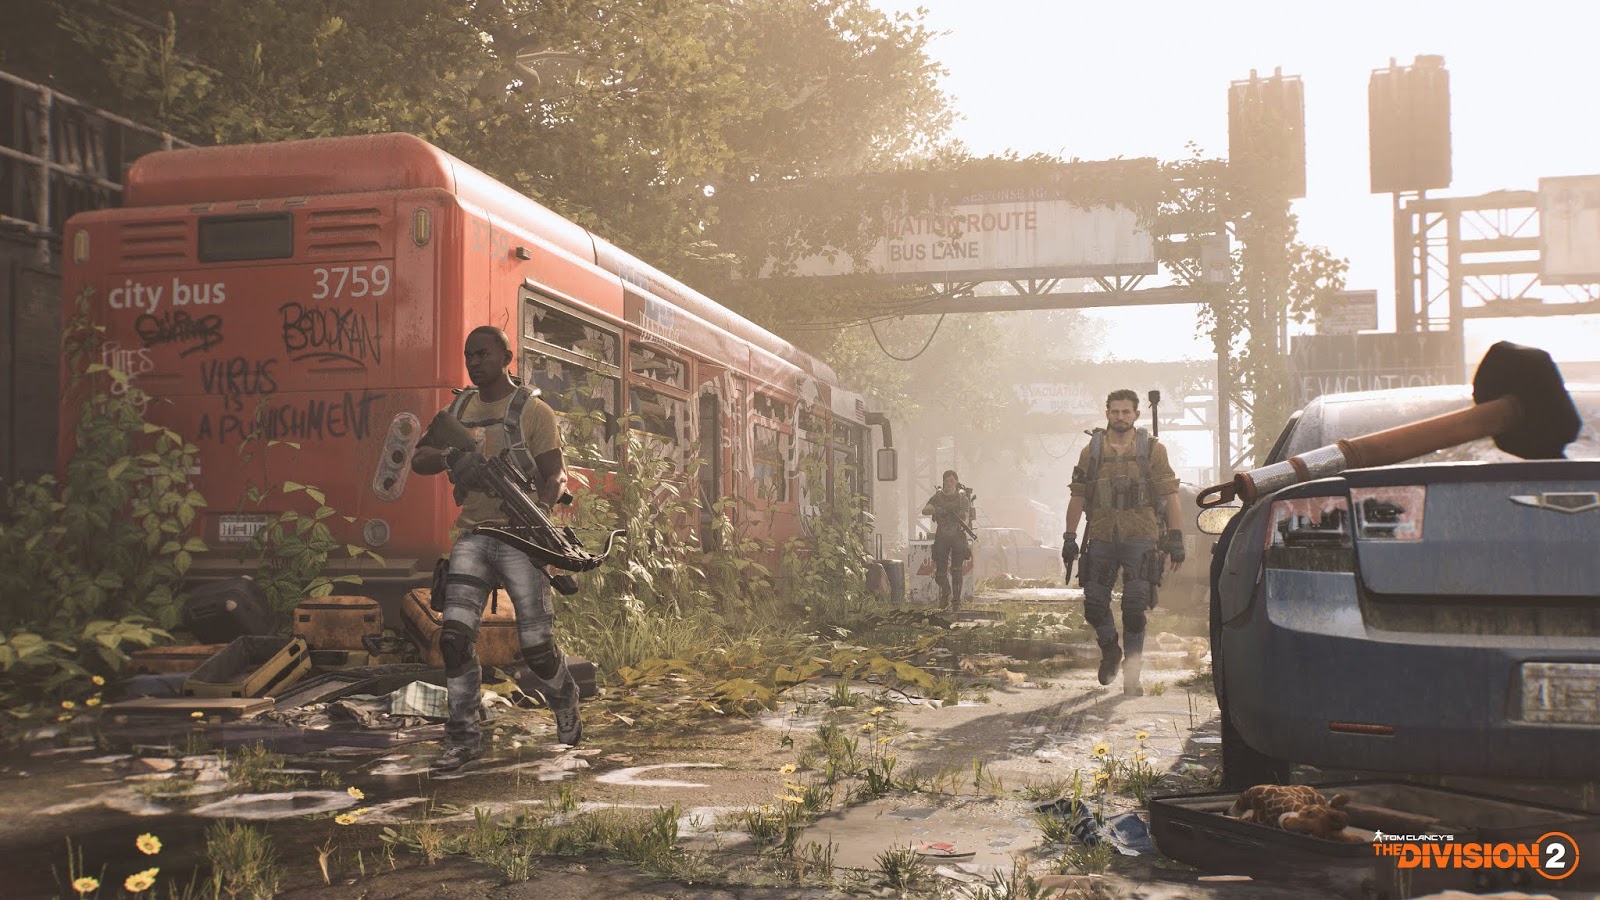 World of Entertainment: The Division 2: PS4 Review